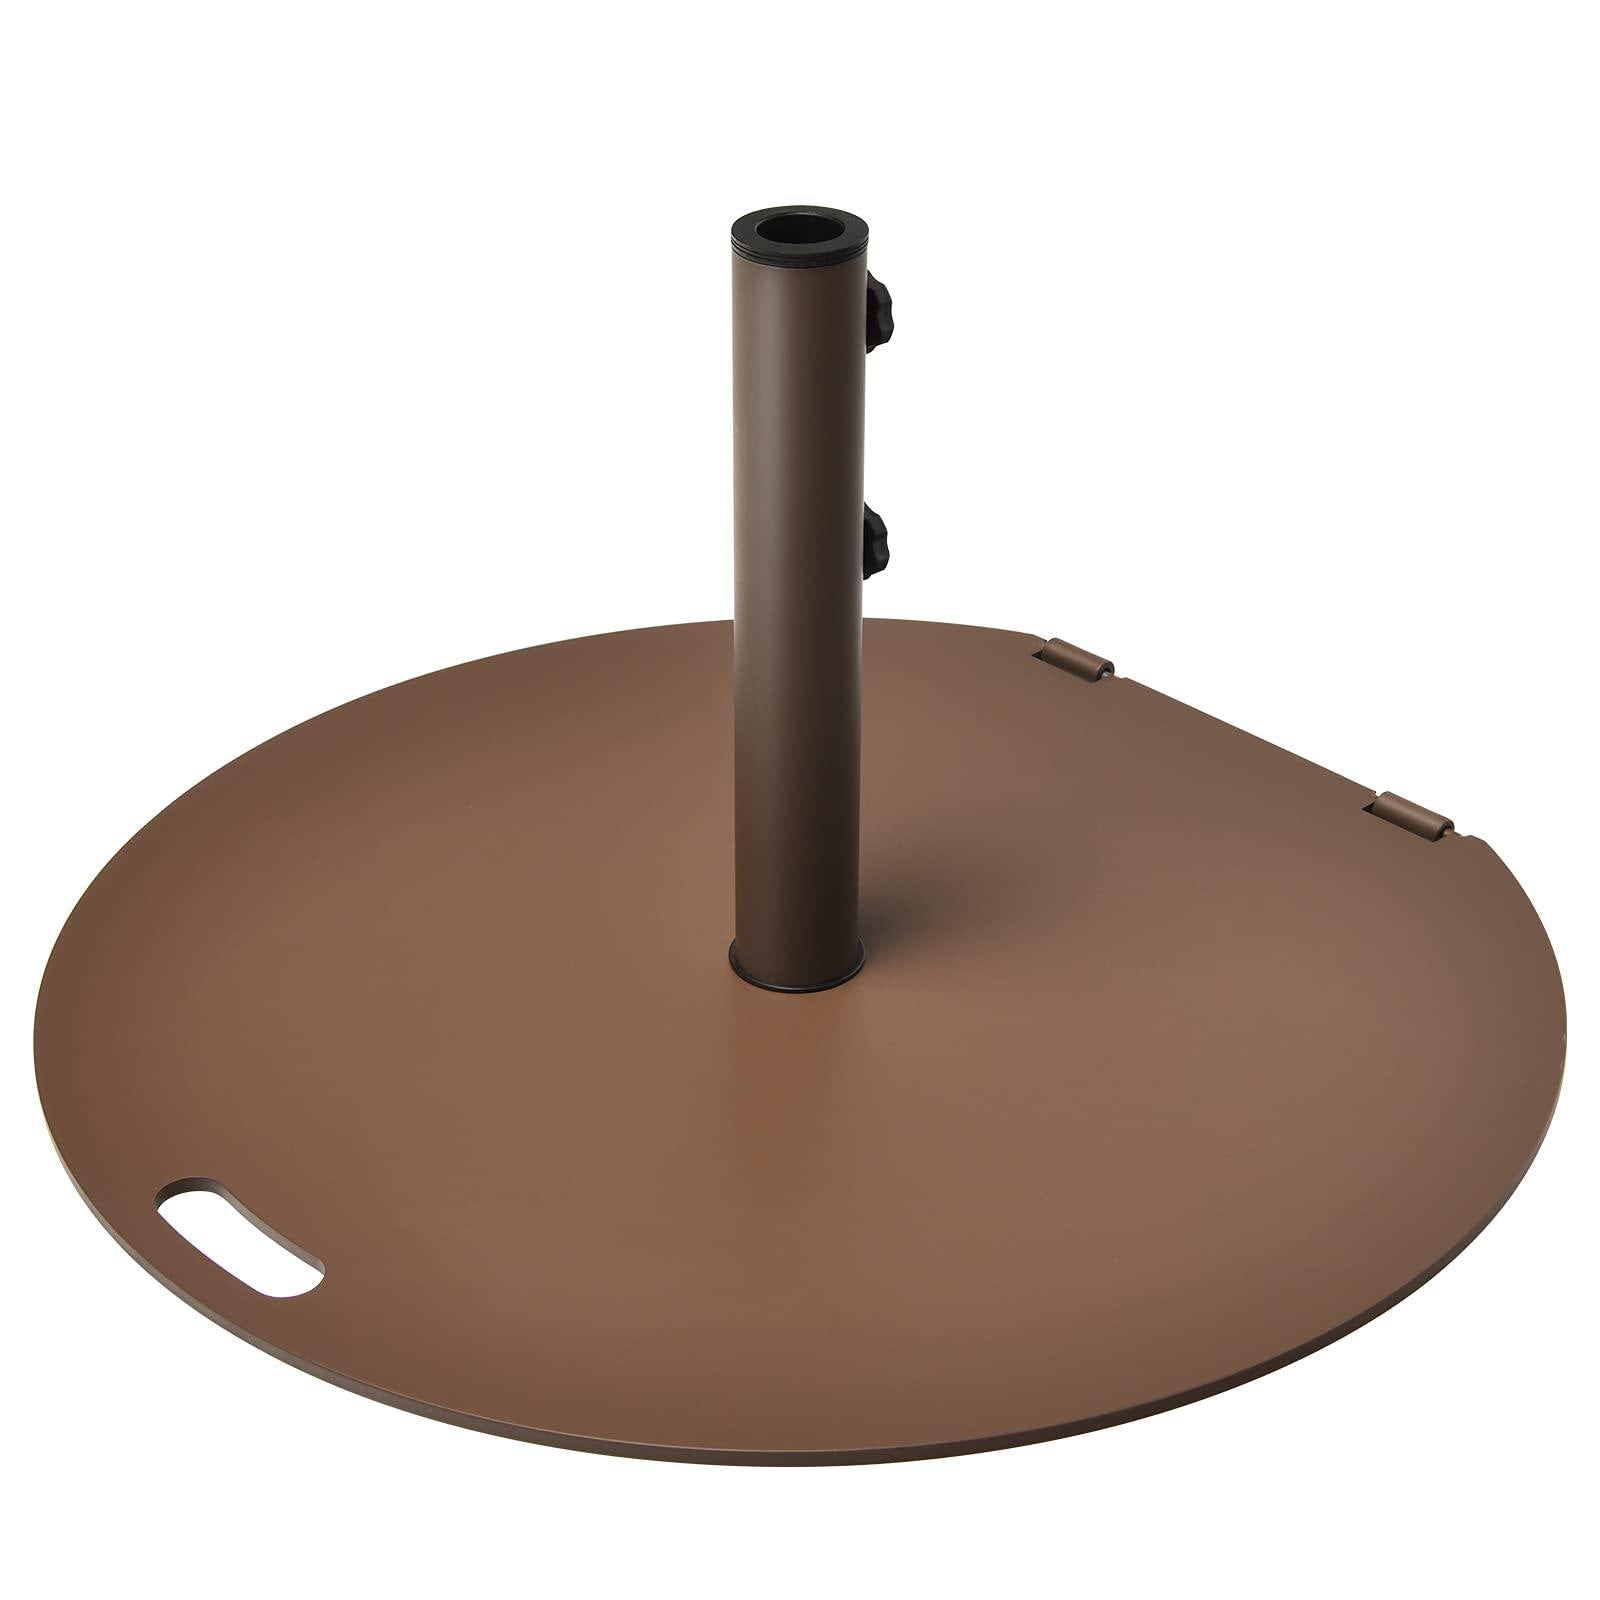 Giantex Patio Umbrella Base, 50 LBS Heavy-Duty Round Umbrella Stand with Wheels, 27.5 Inch/Brown/Square